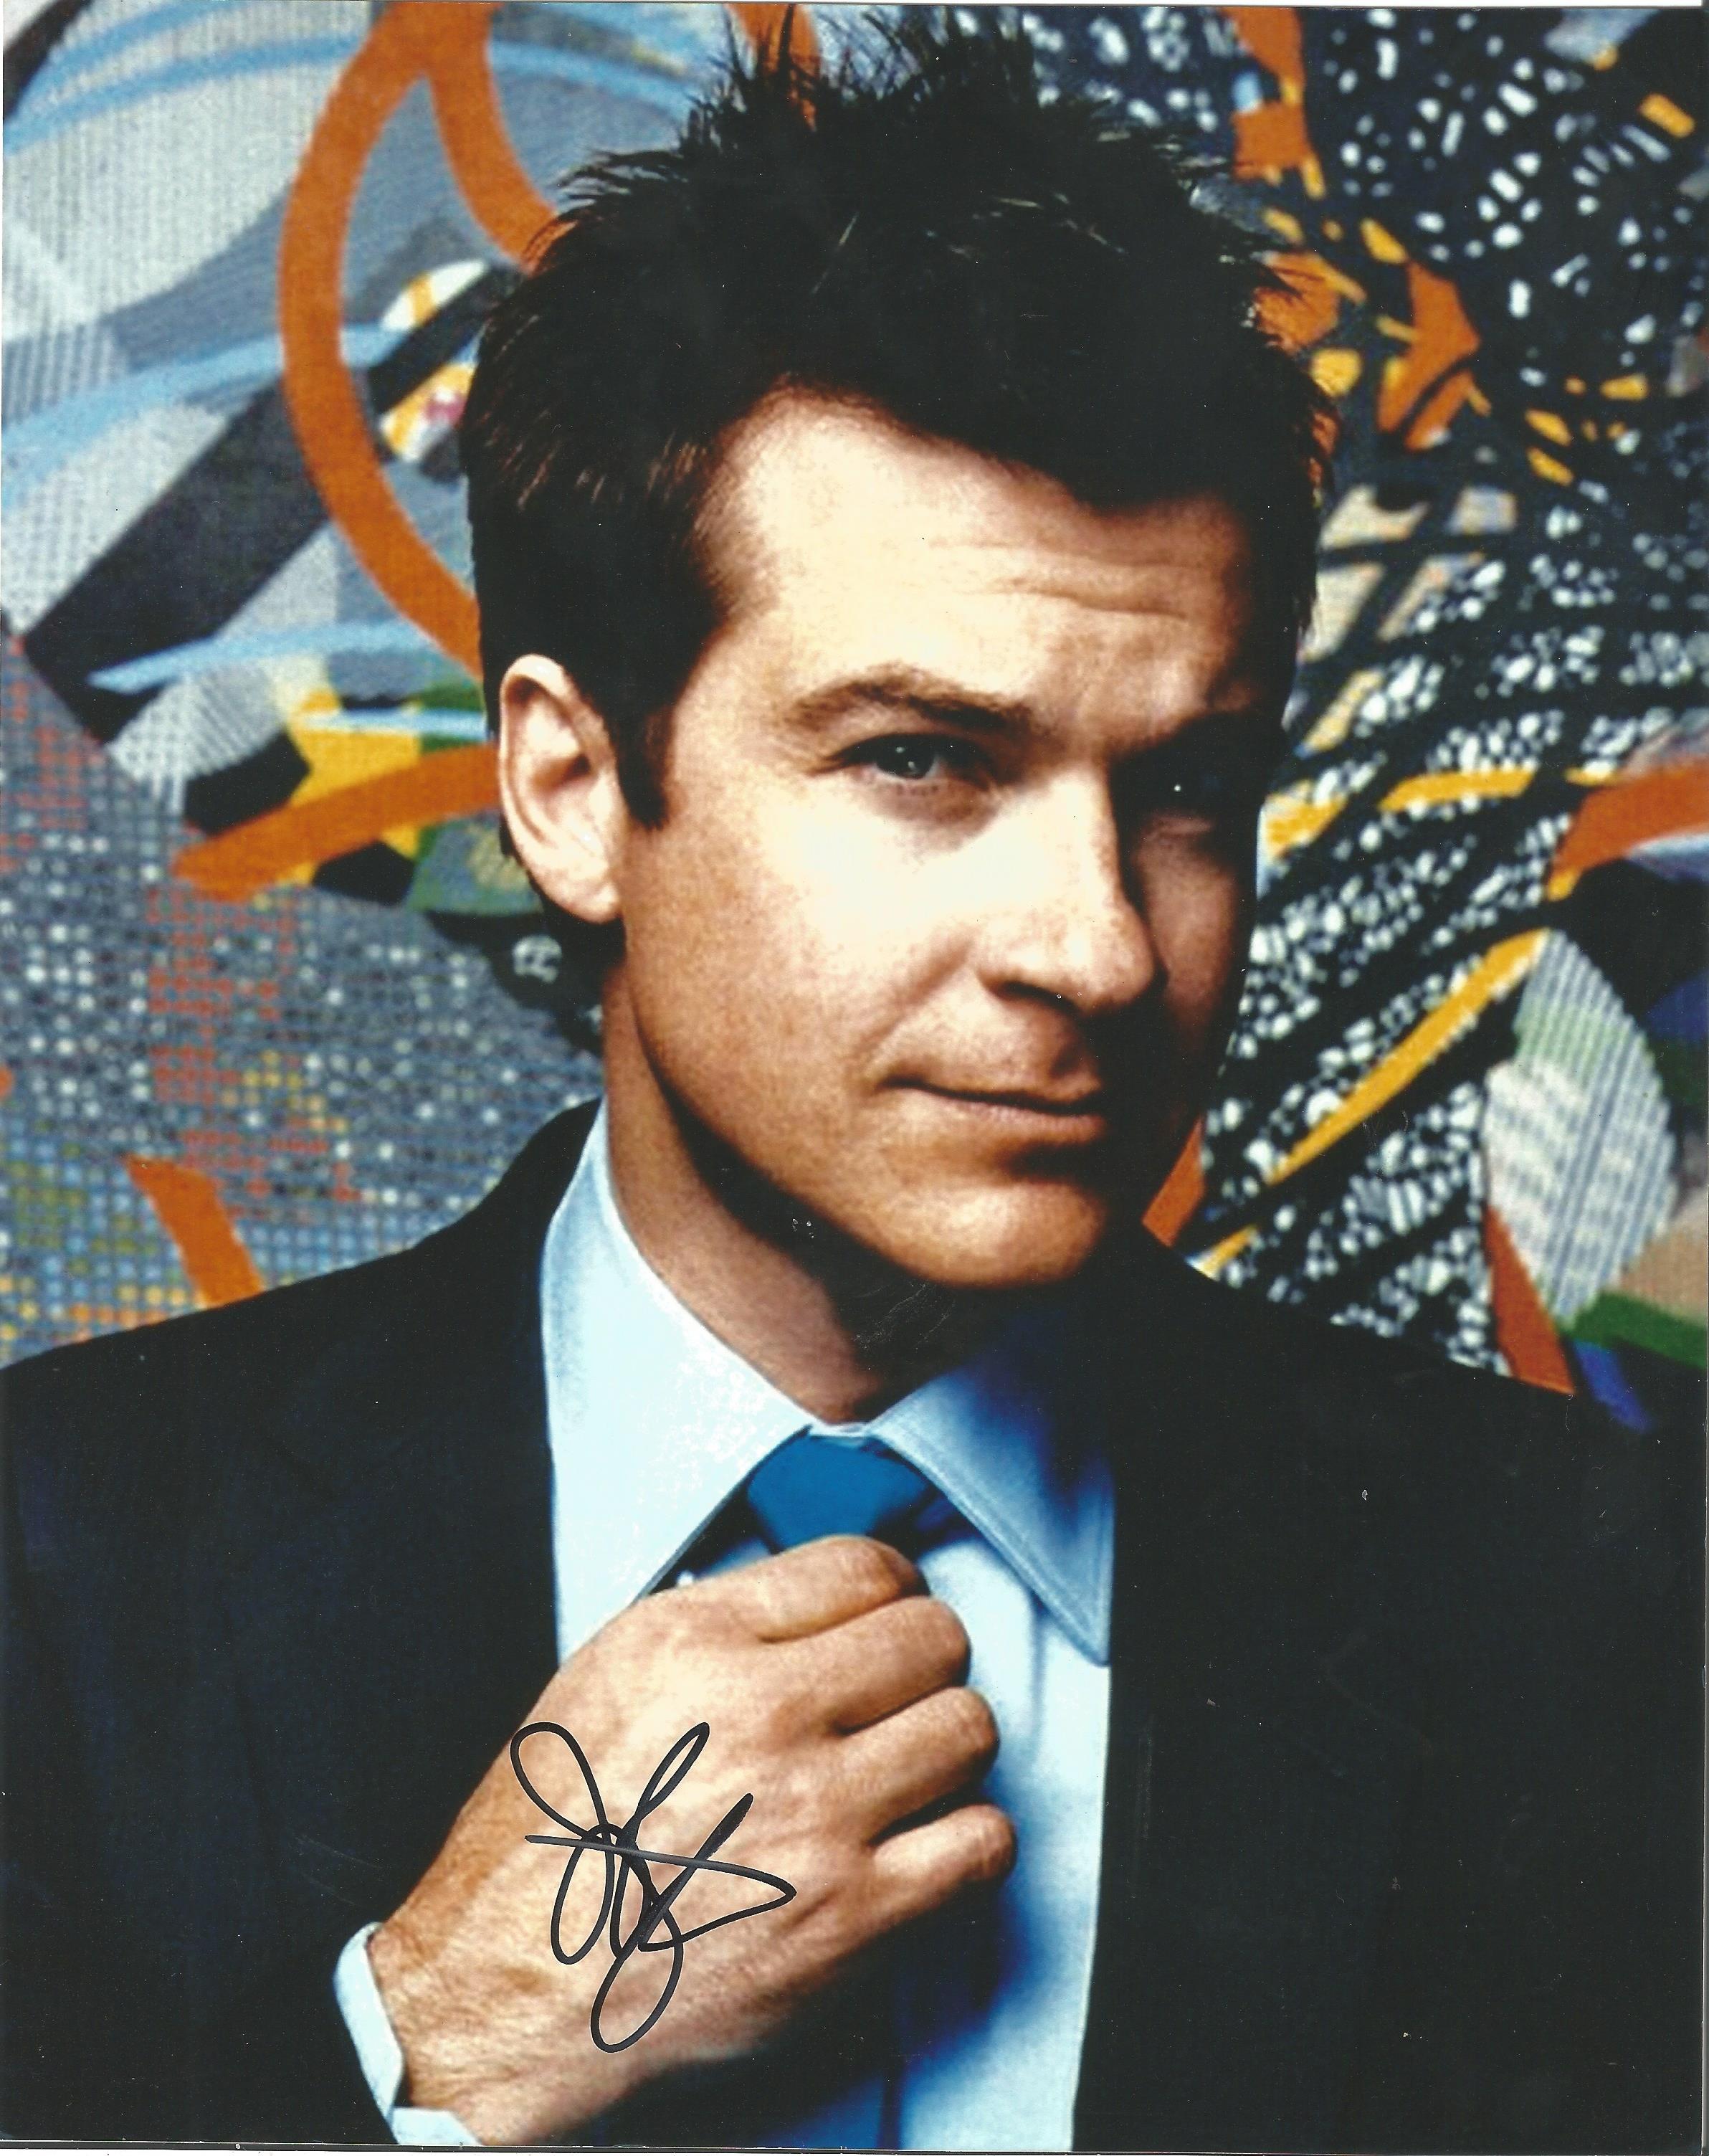 Jason Bateman signed 10 x 8 colour Photoshoot Portrait Photo, from in person collection